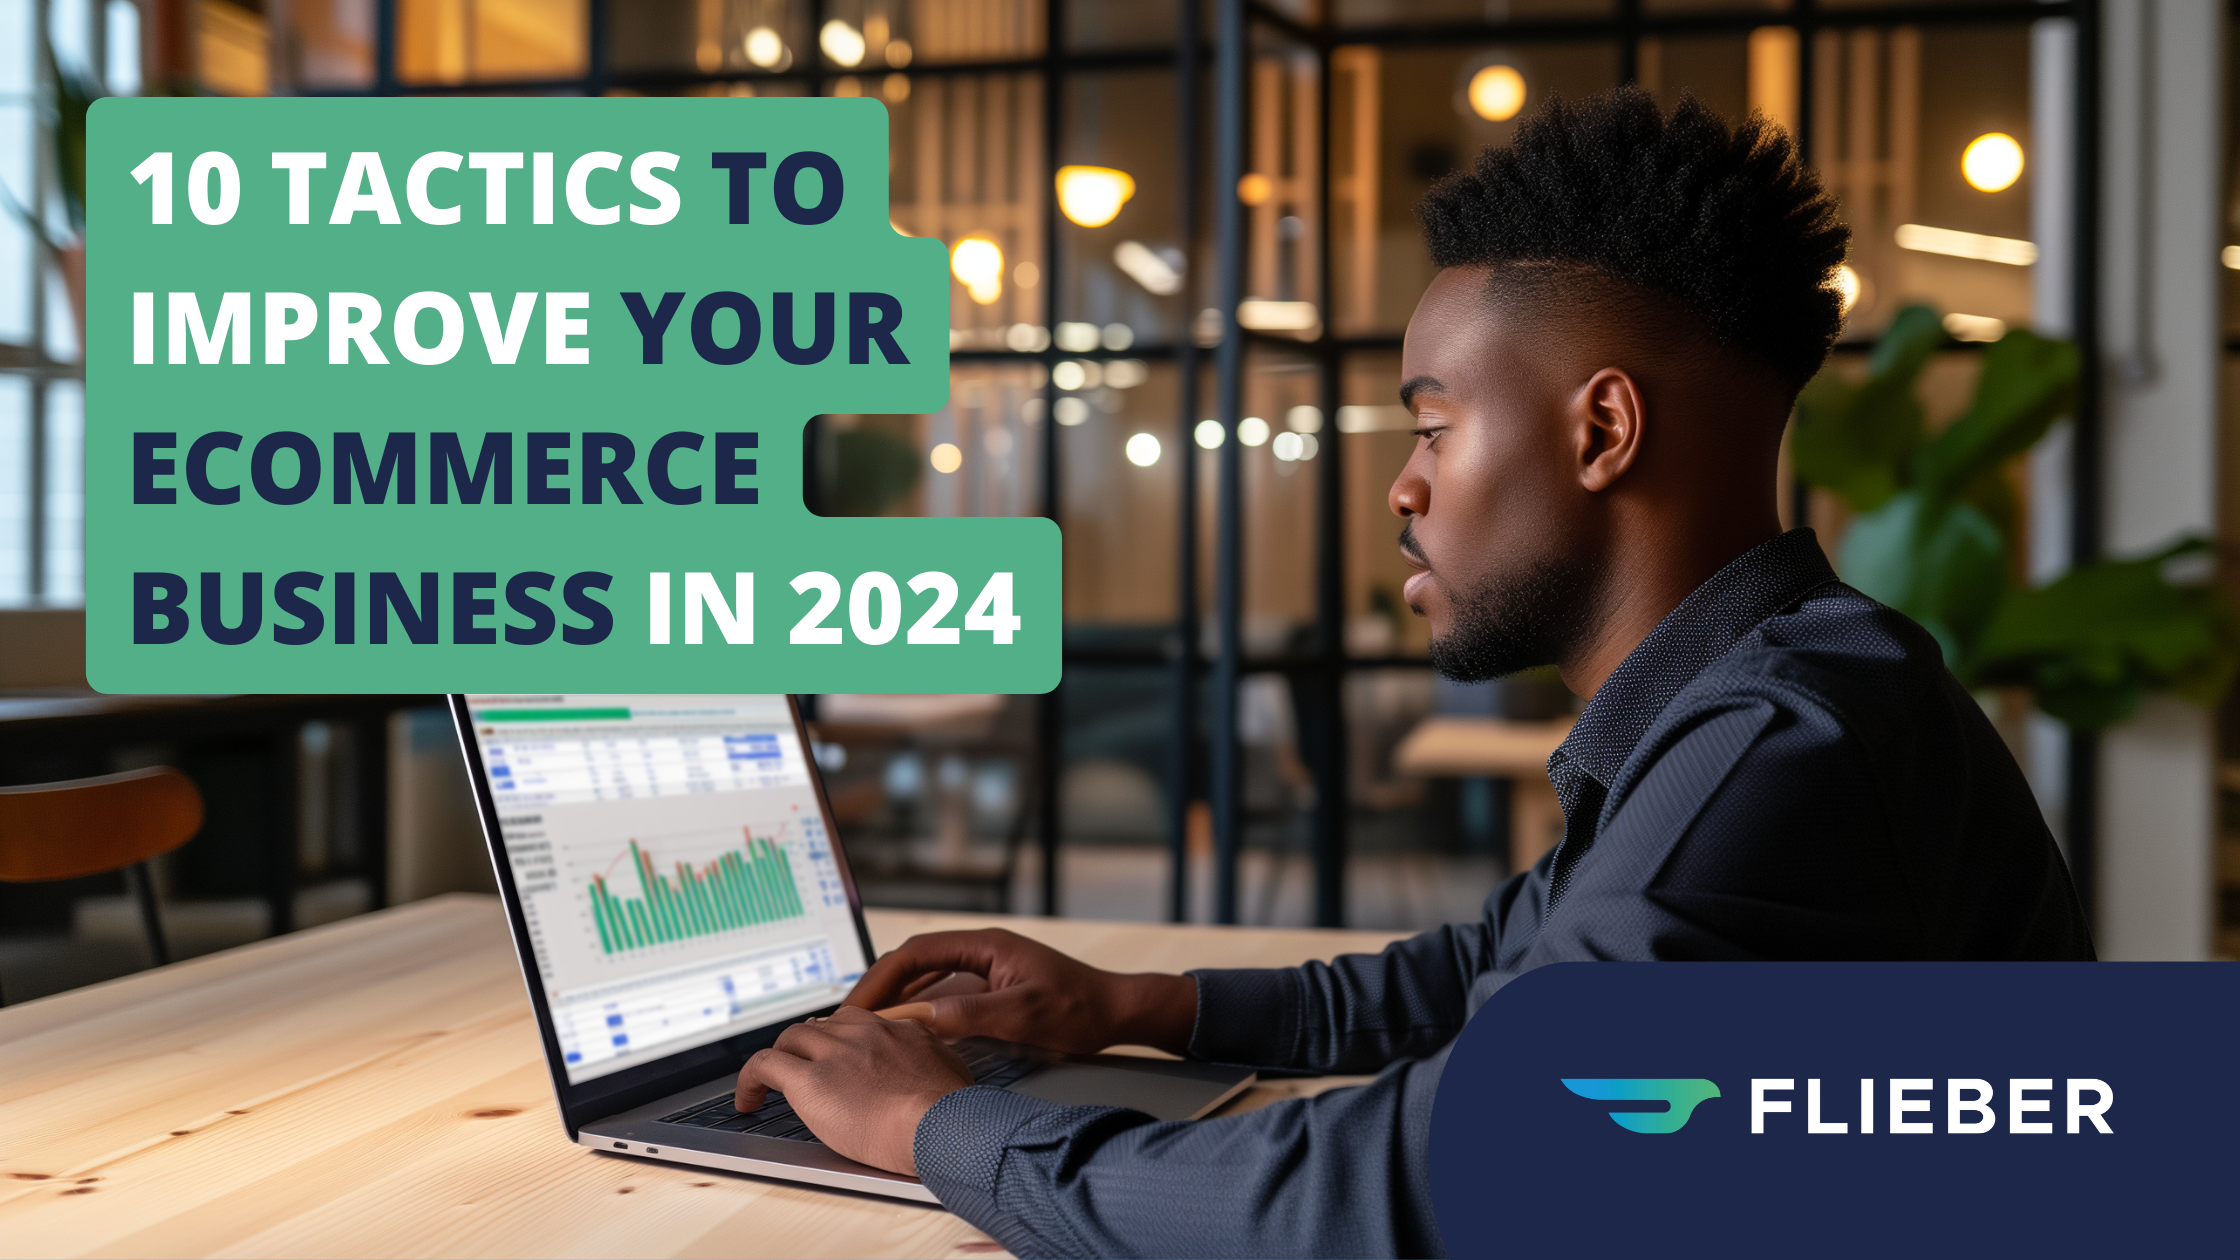 How to Increase E-commerce Sales: 10 Tactics for 2024